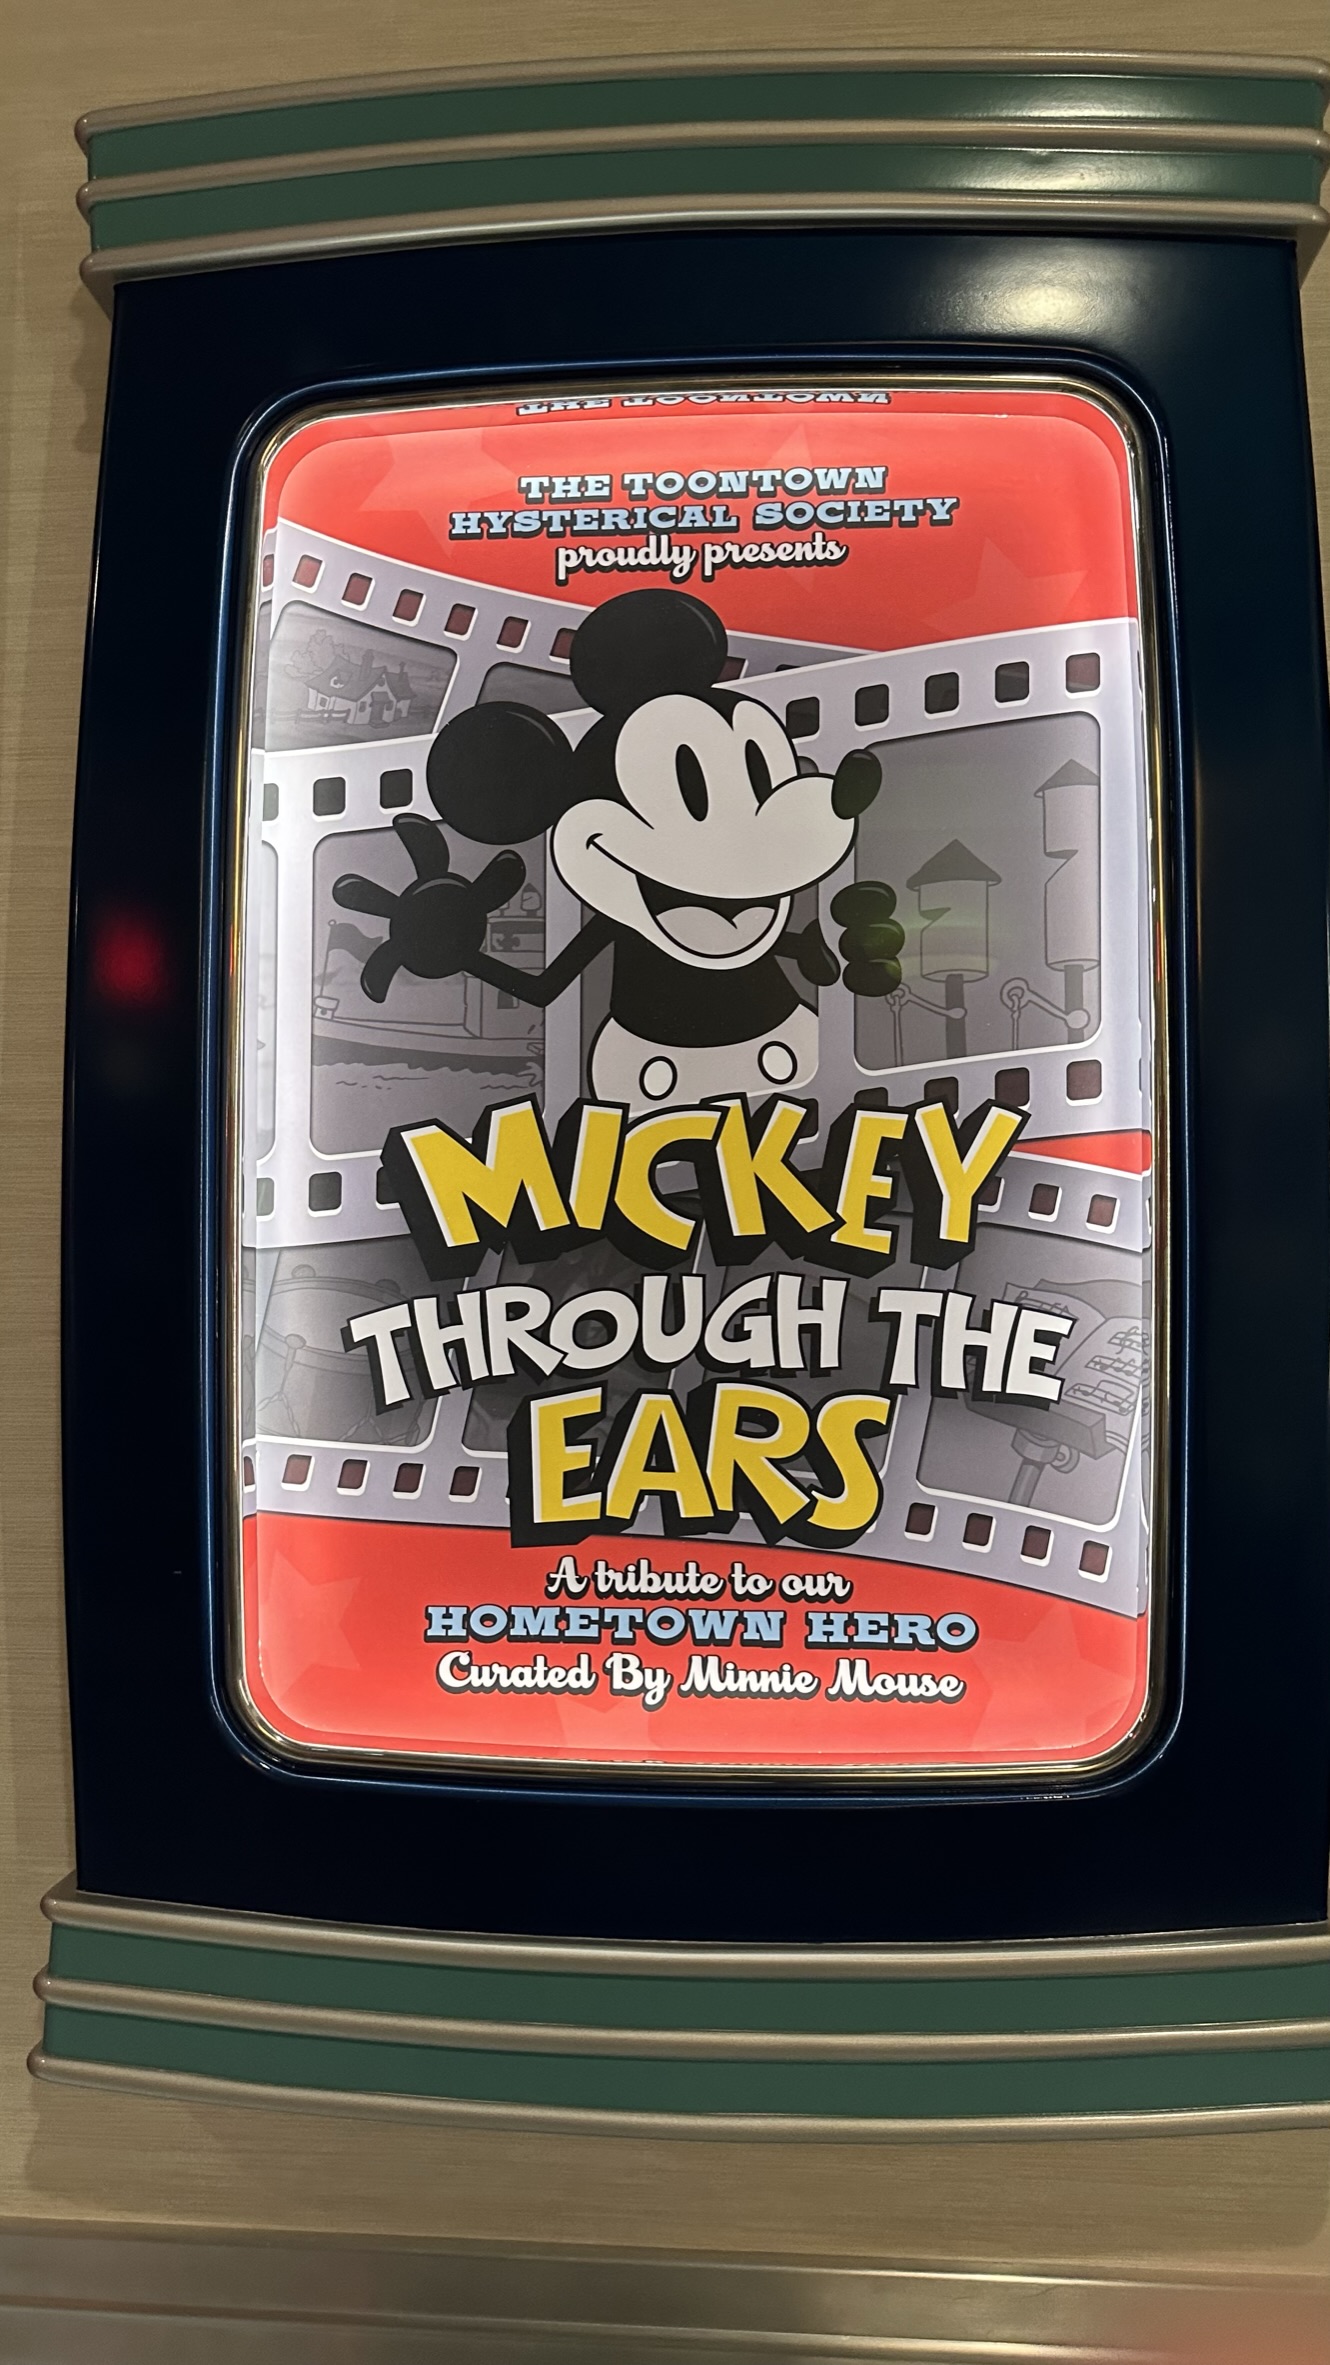 Experience the Magic: A Journey through Mickey and Minnies Runaway Railway at Disneyland El CapiTOON